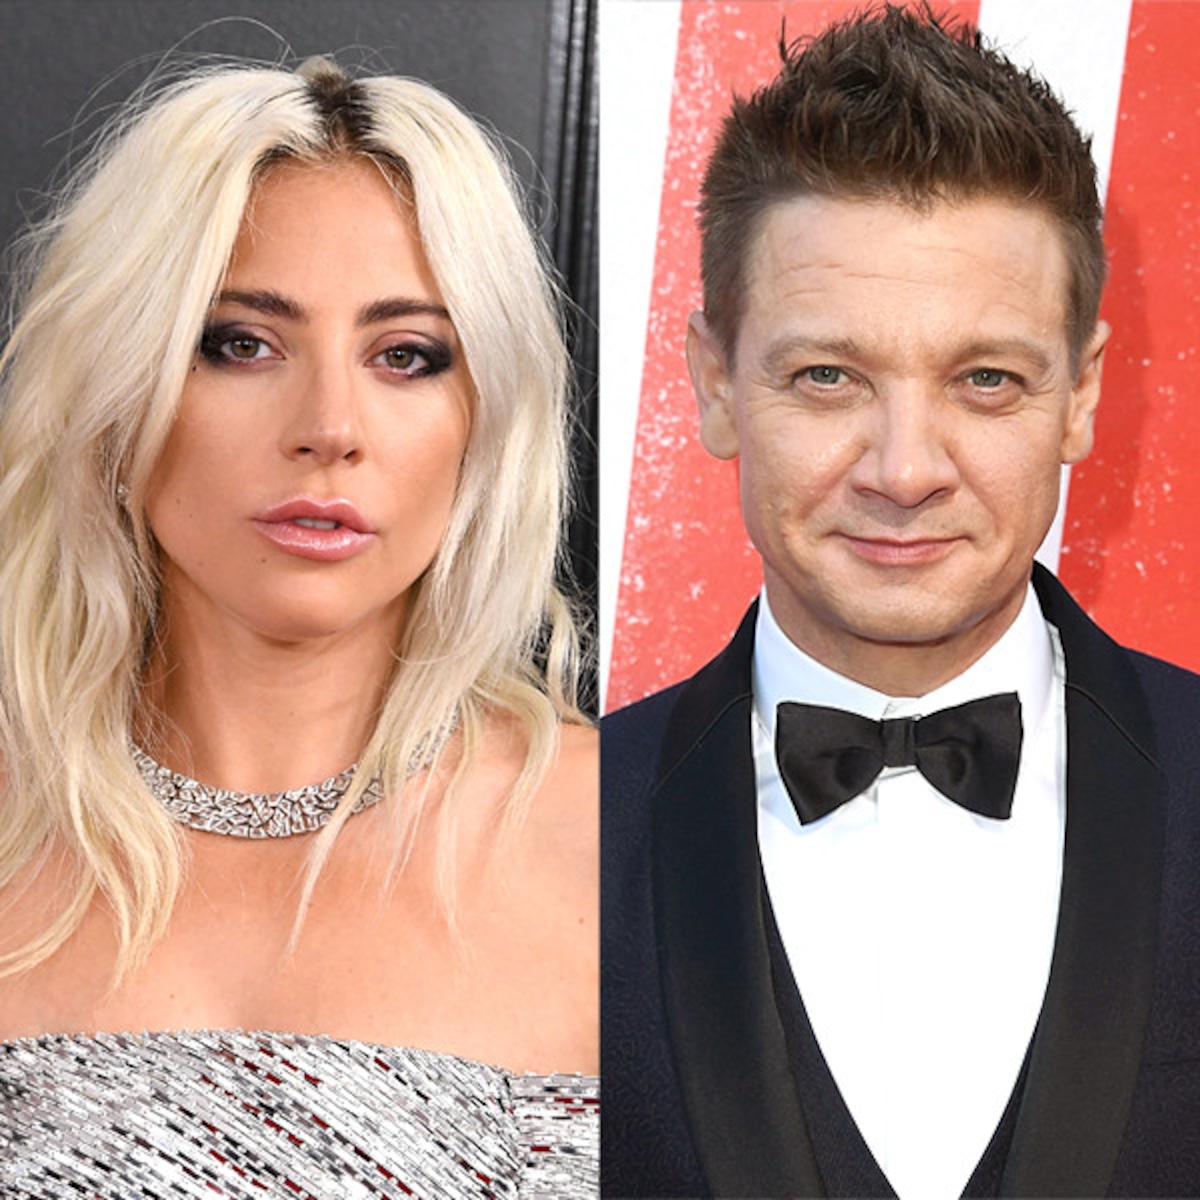 whats Going On Between Lady Gaga Jeremy Renner E Online